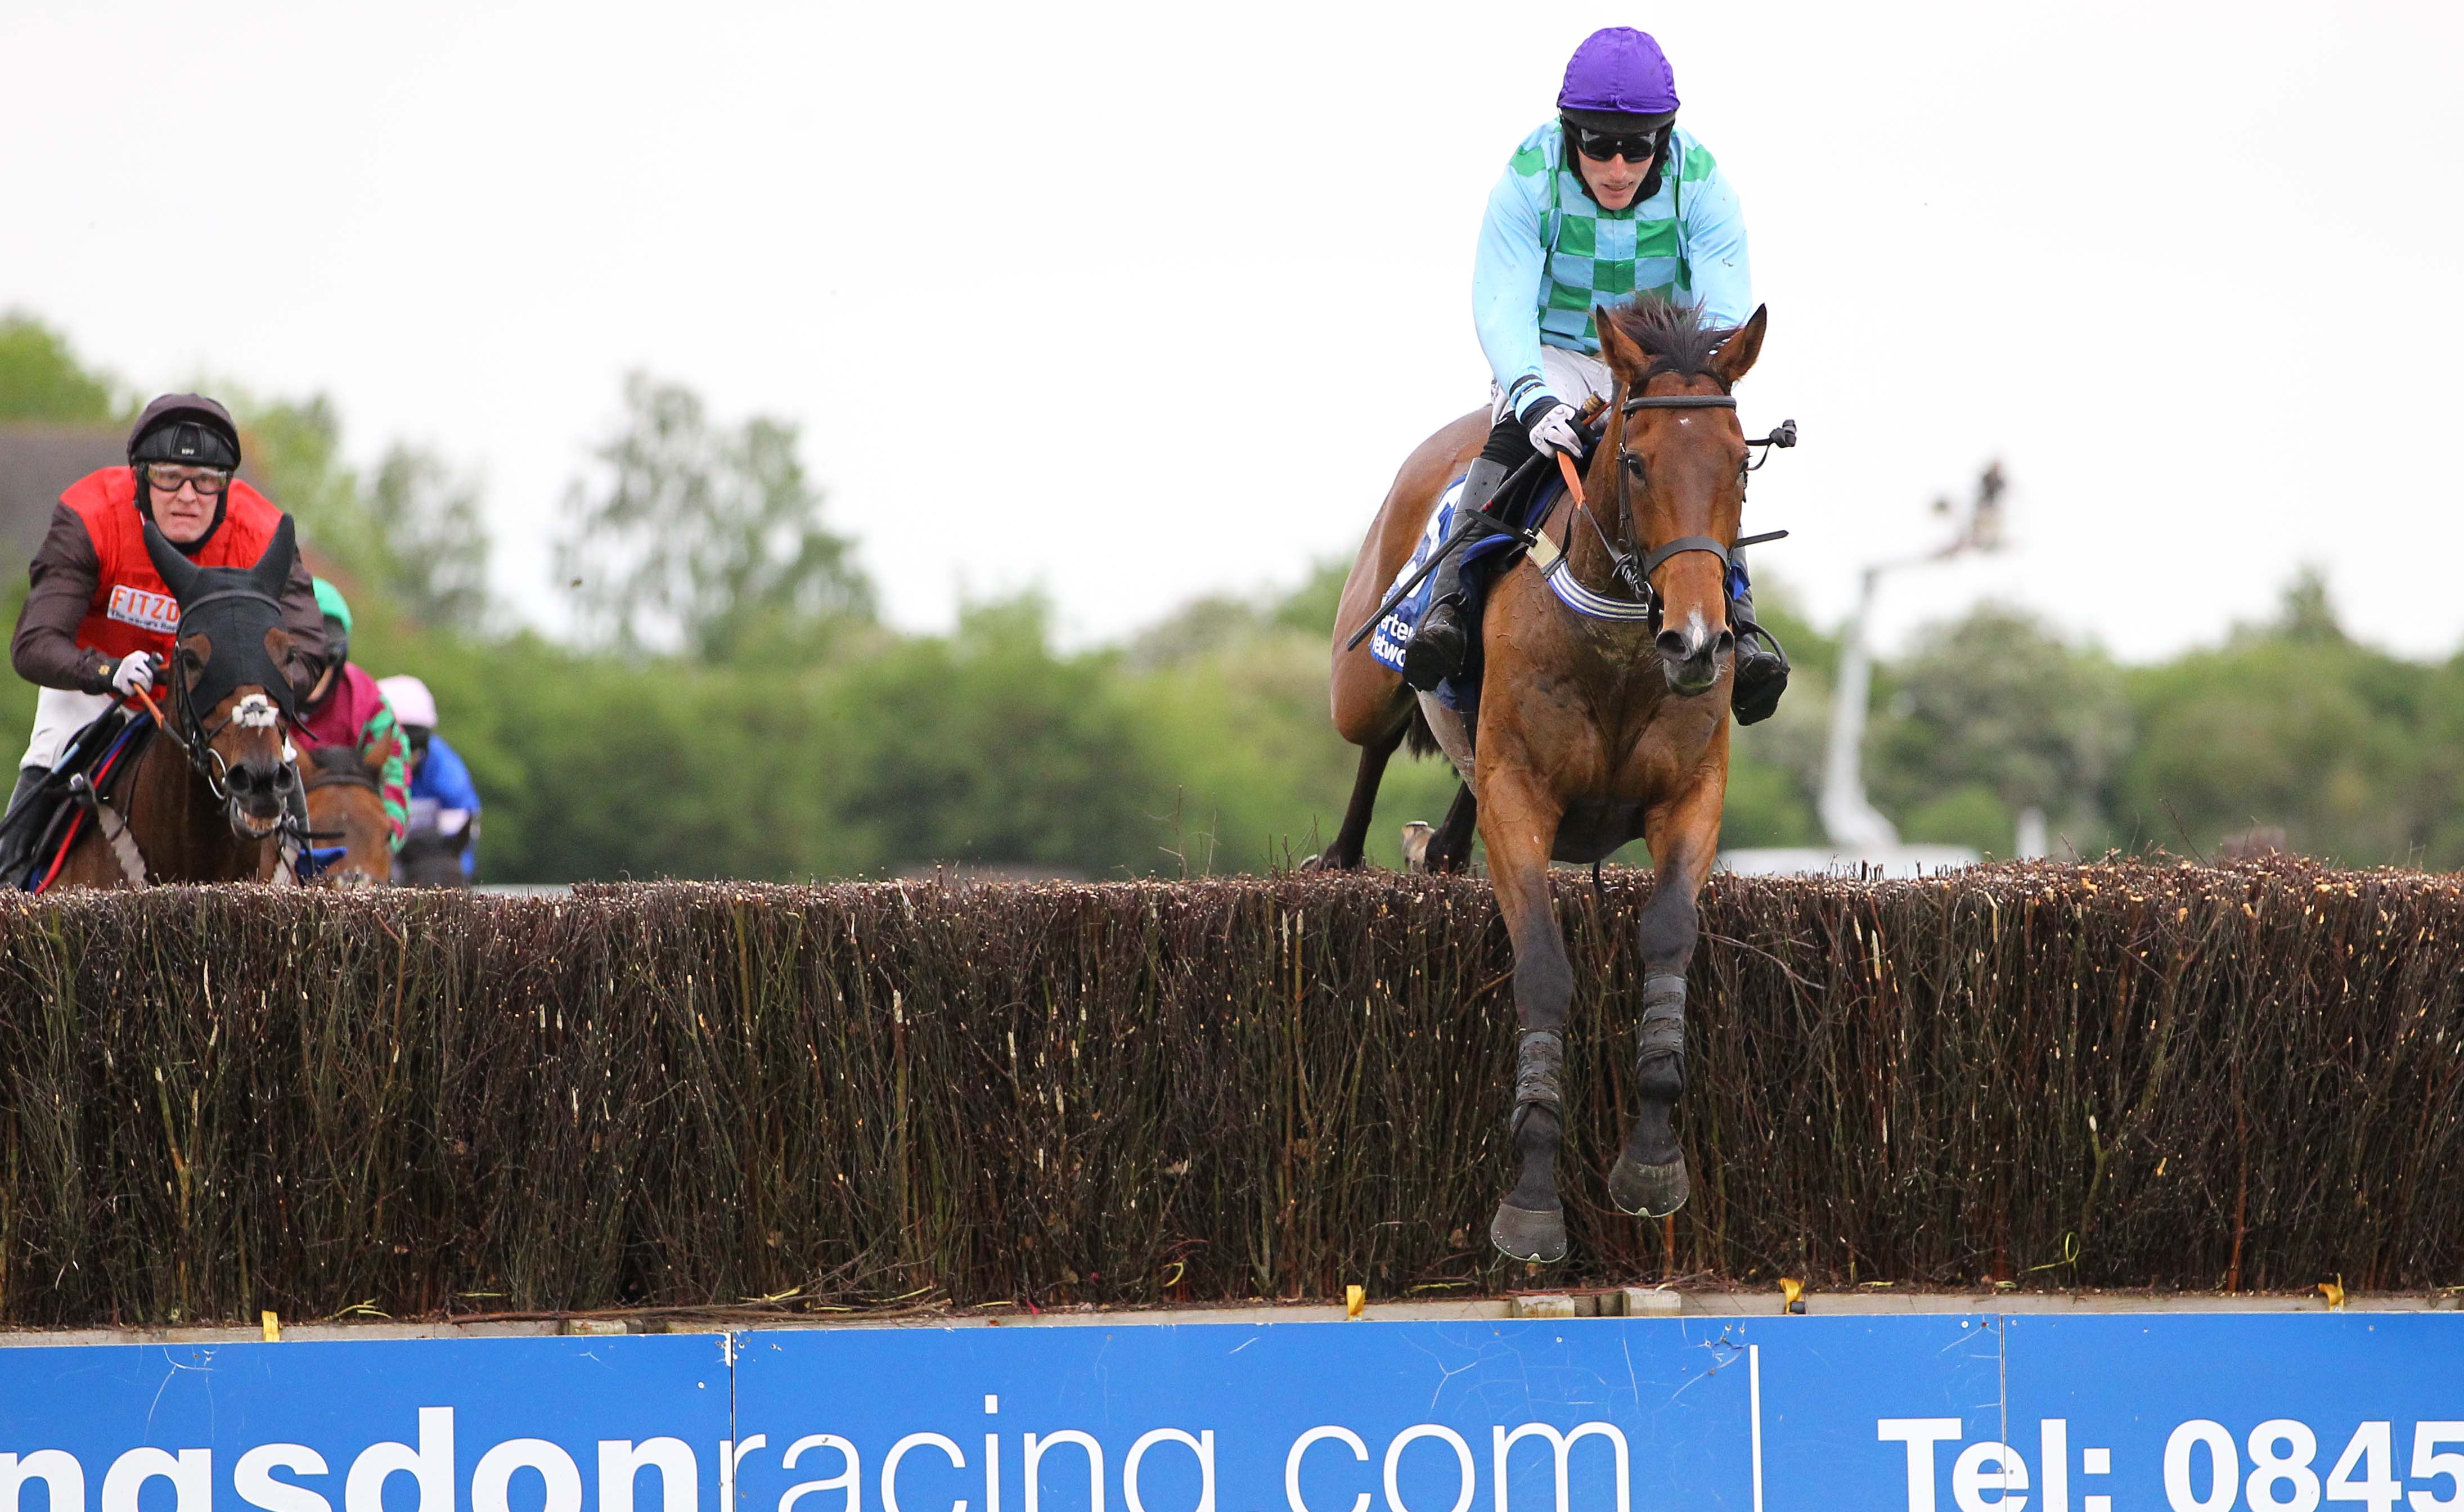 Law of Gold wins the Stratford Foxhunter